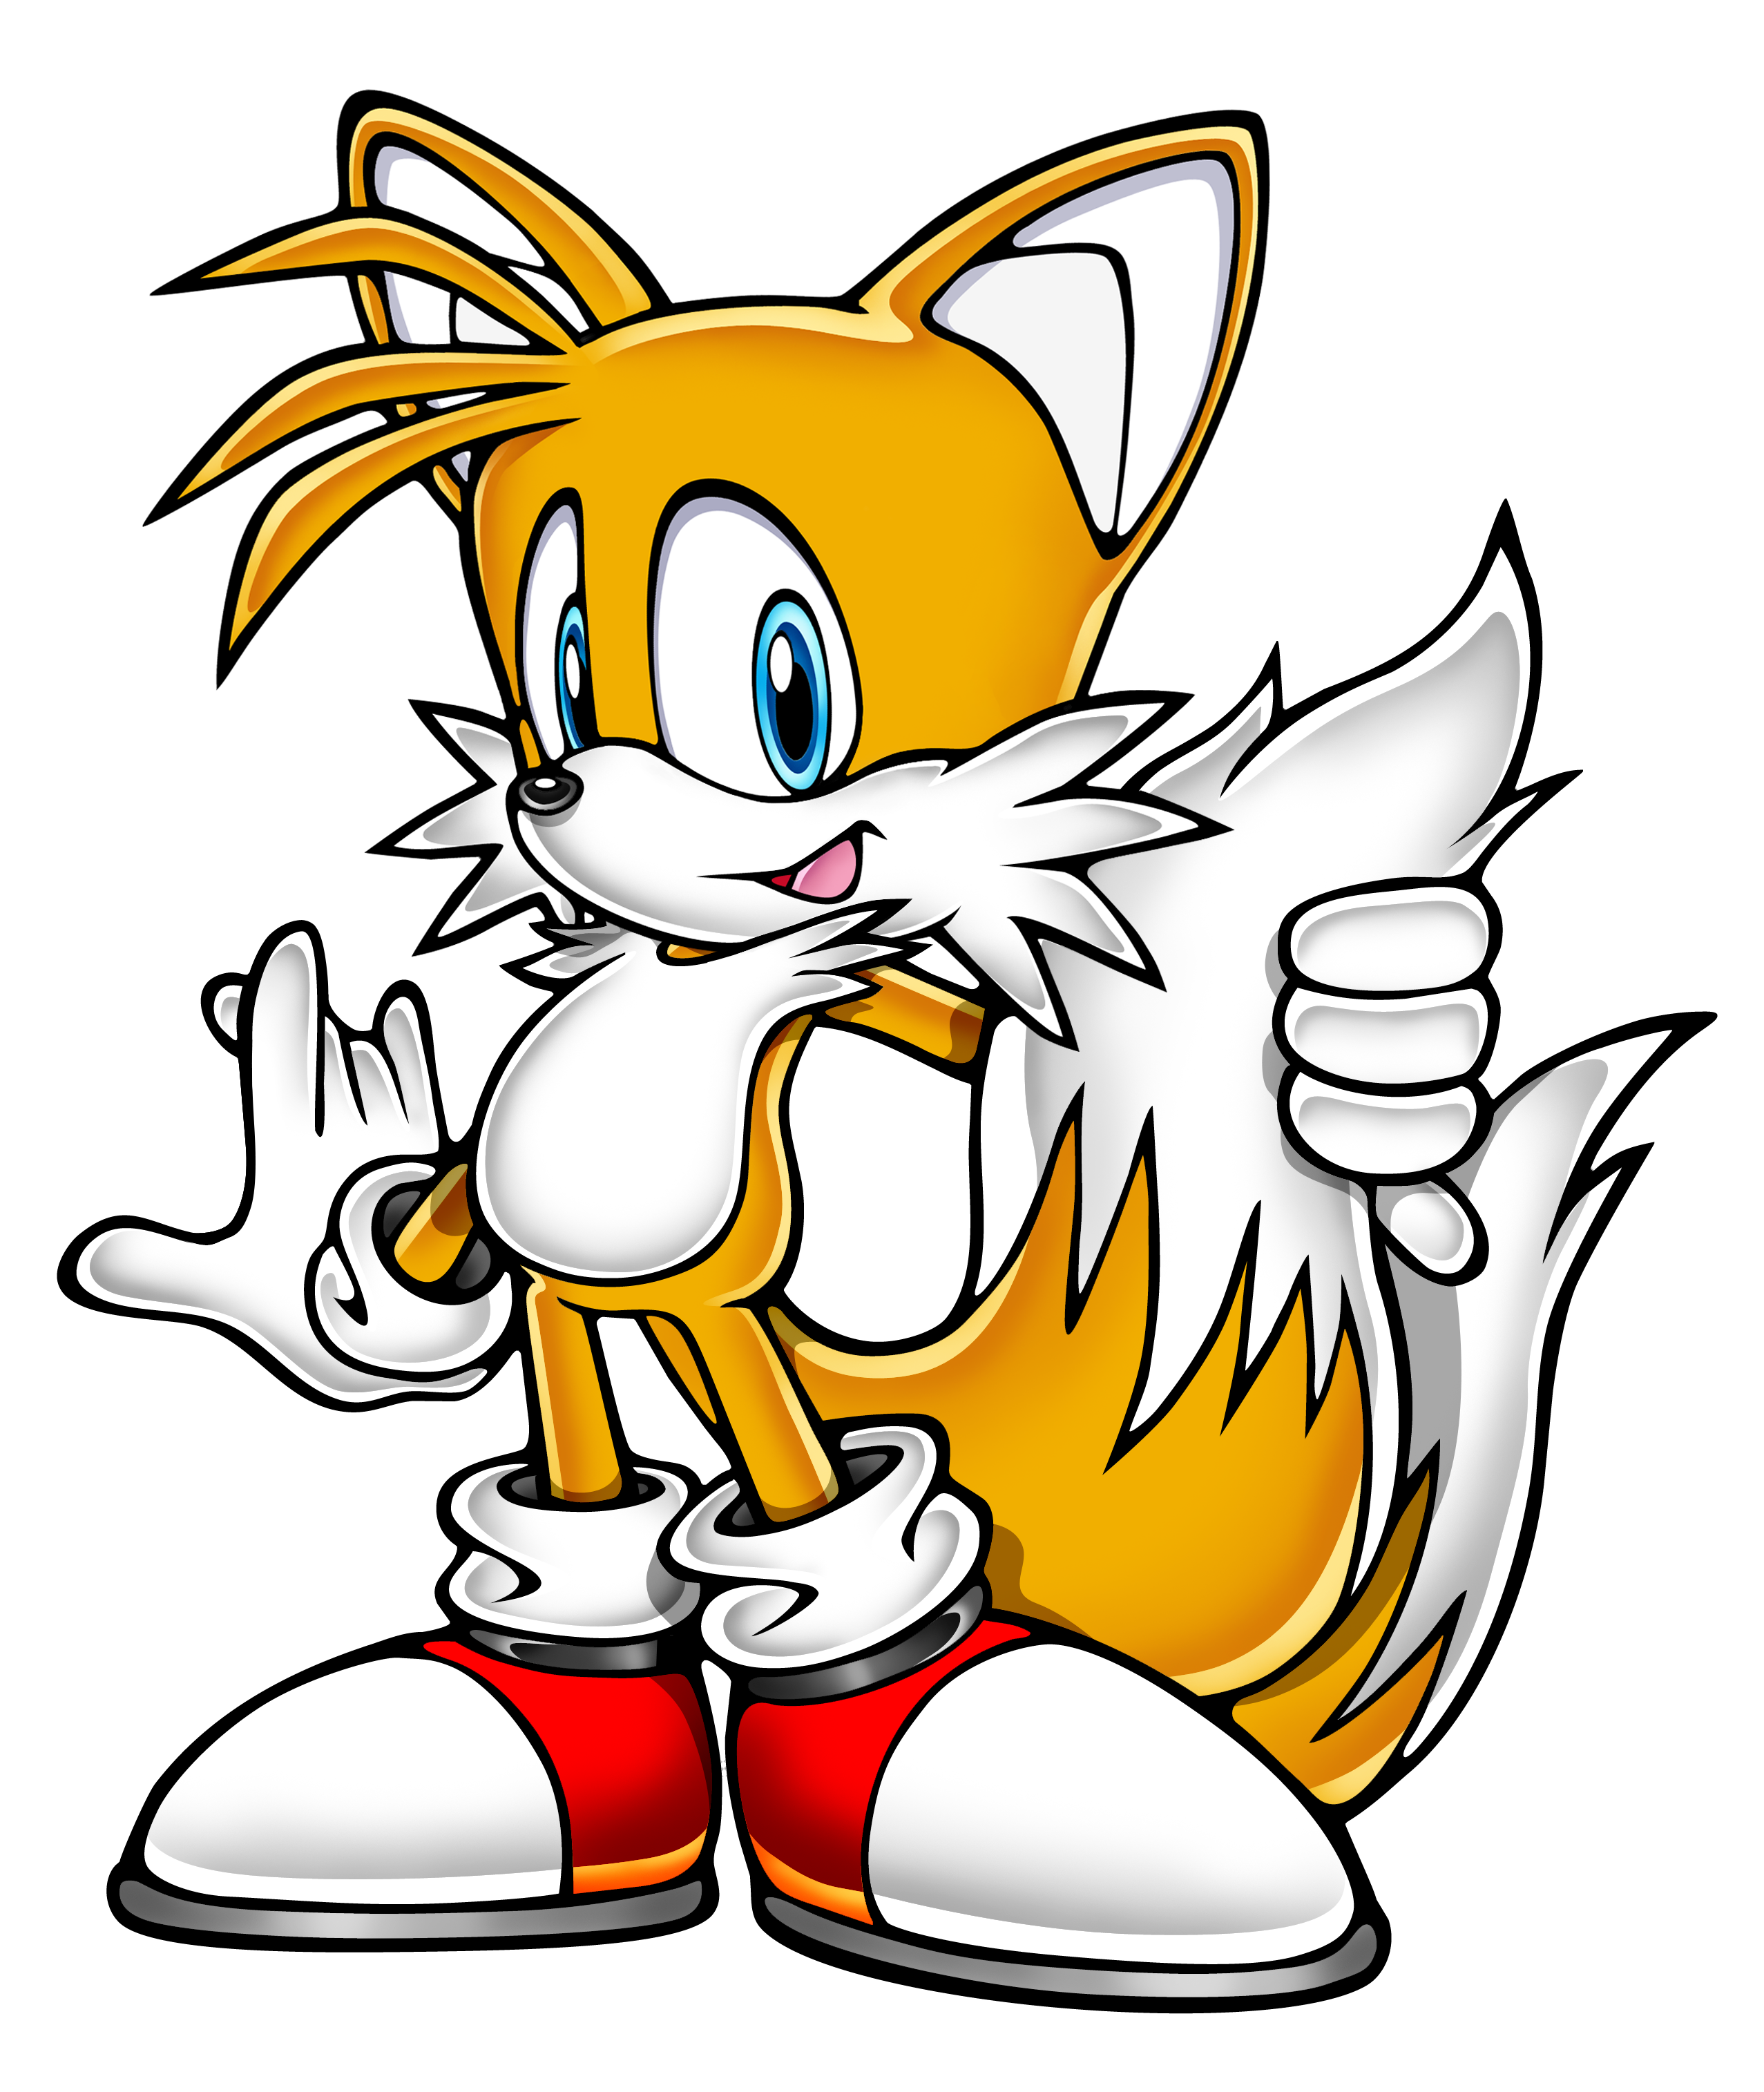 download tails the adventures of sonic the hedgehog